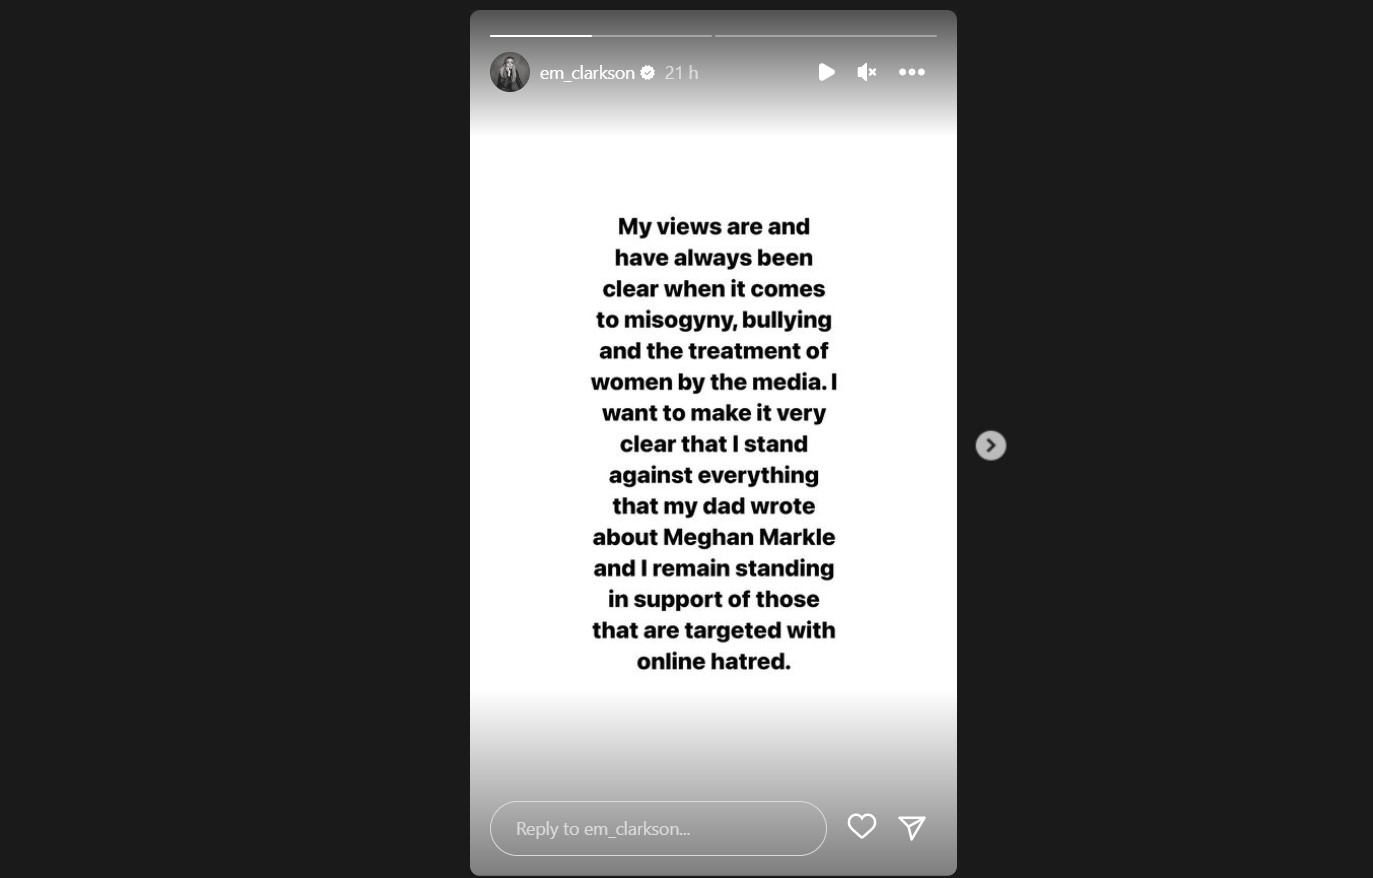 Emily Clarkson posted this message on Instagram.